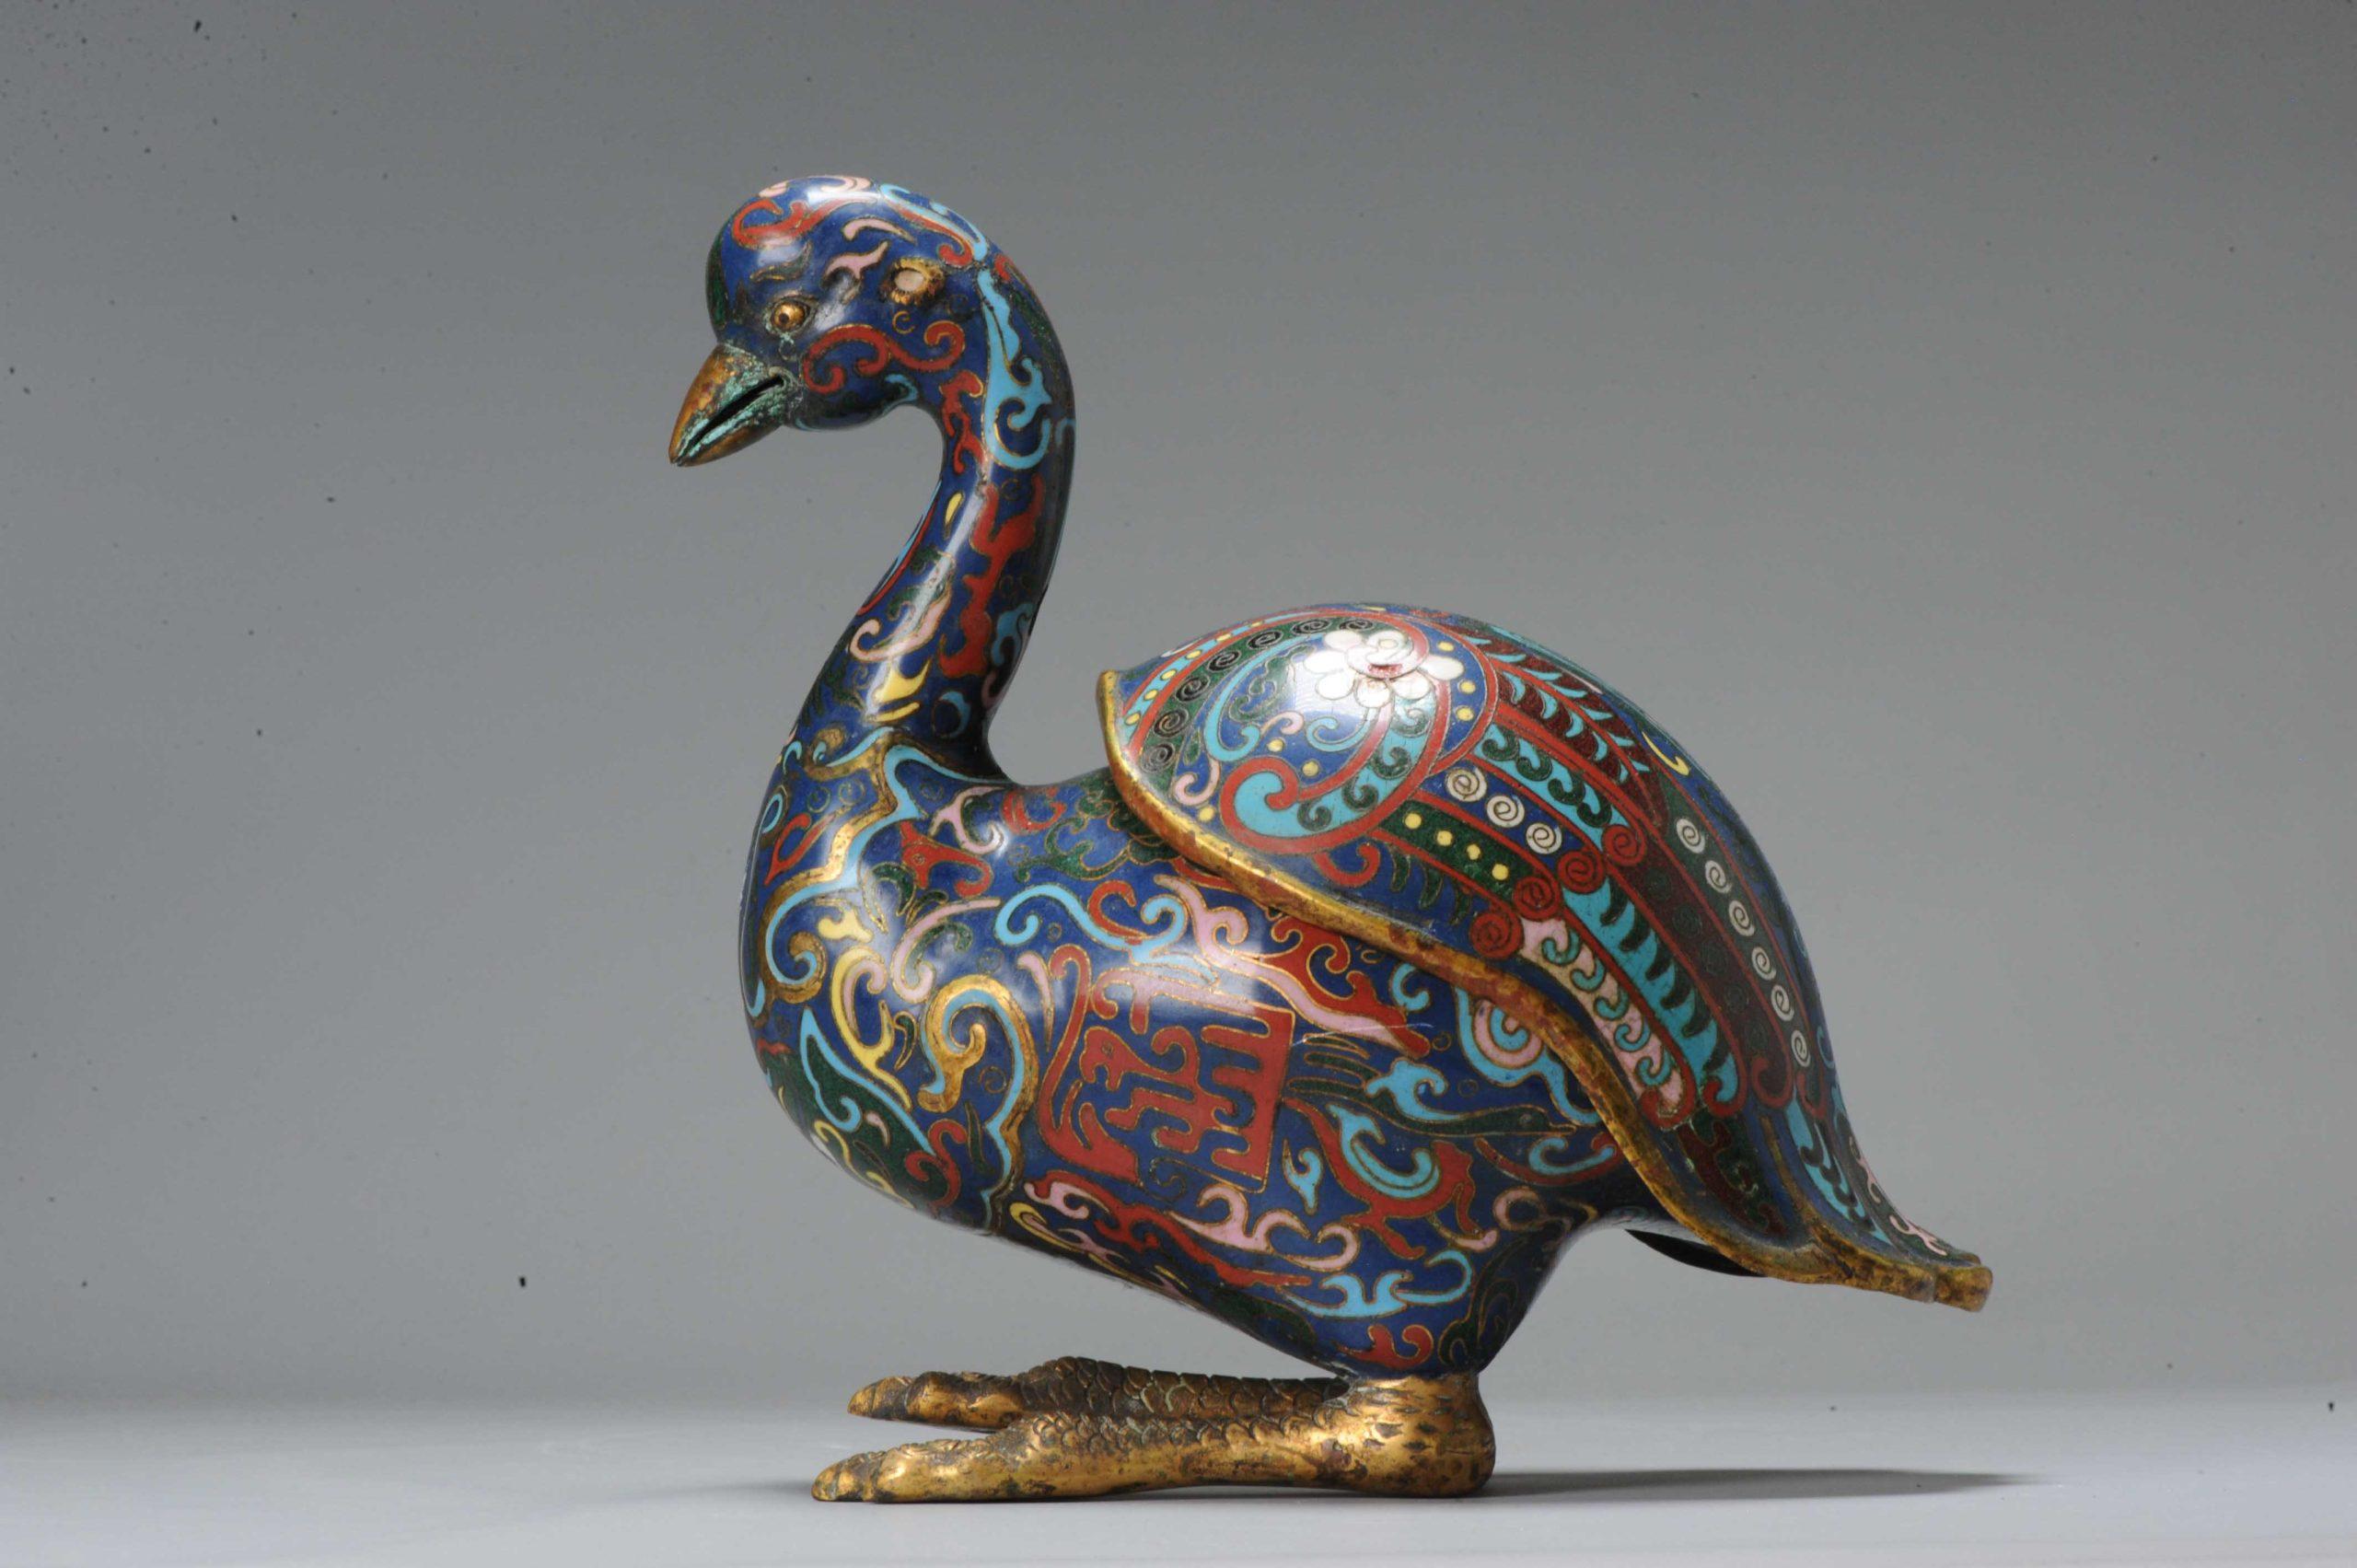 Description
Nice Pair of 2 Geese in Cloisonne. High Quality with superb decoration and craftmenship.

Condition
Some small damages likes missing enamel and some ware to enamel. Size 200x200mm DiameterxHeight

Period
19th century
20th century